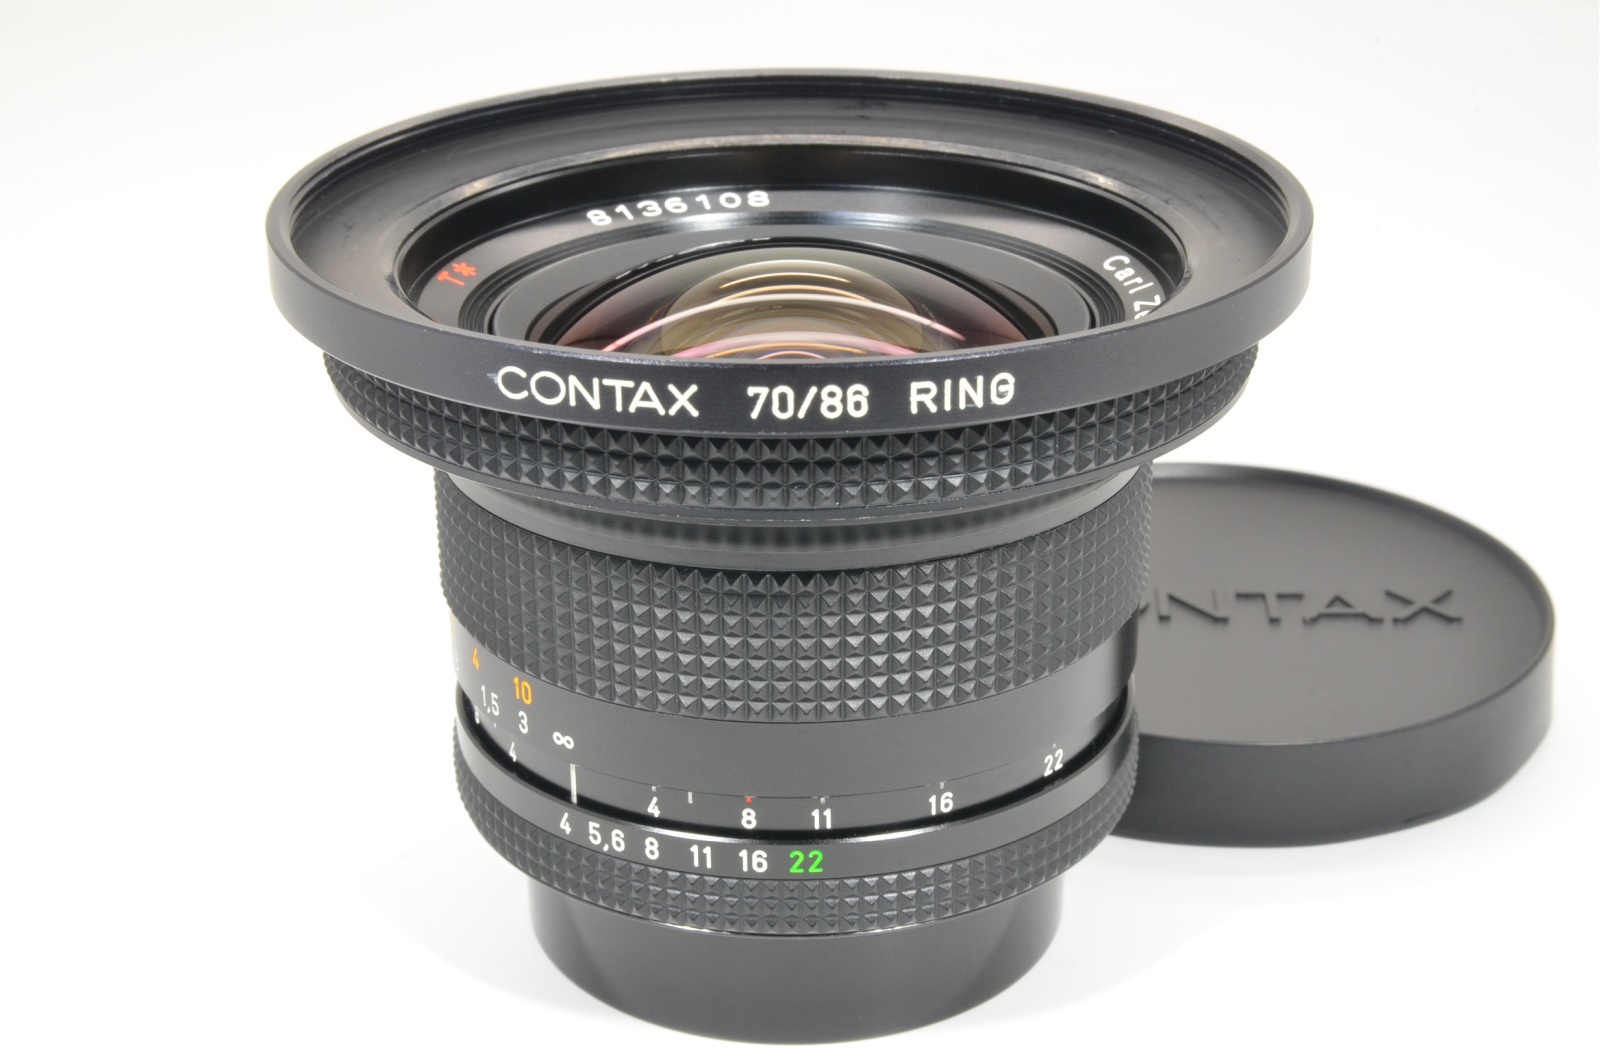 CONTAX Carl Zeiss Distagon T* 18mm f4 MMJ Japan with 70/86 RING